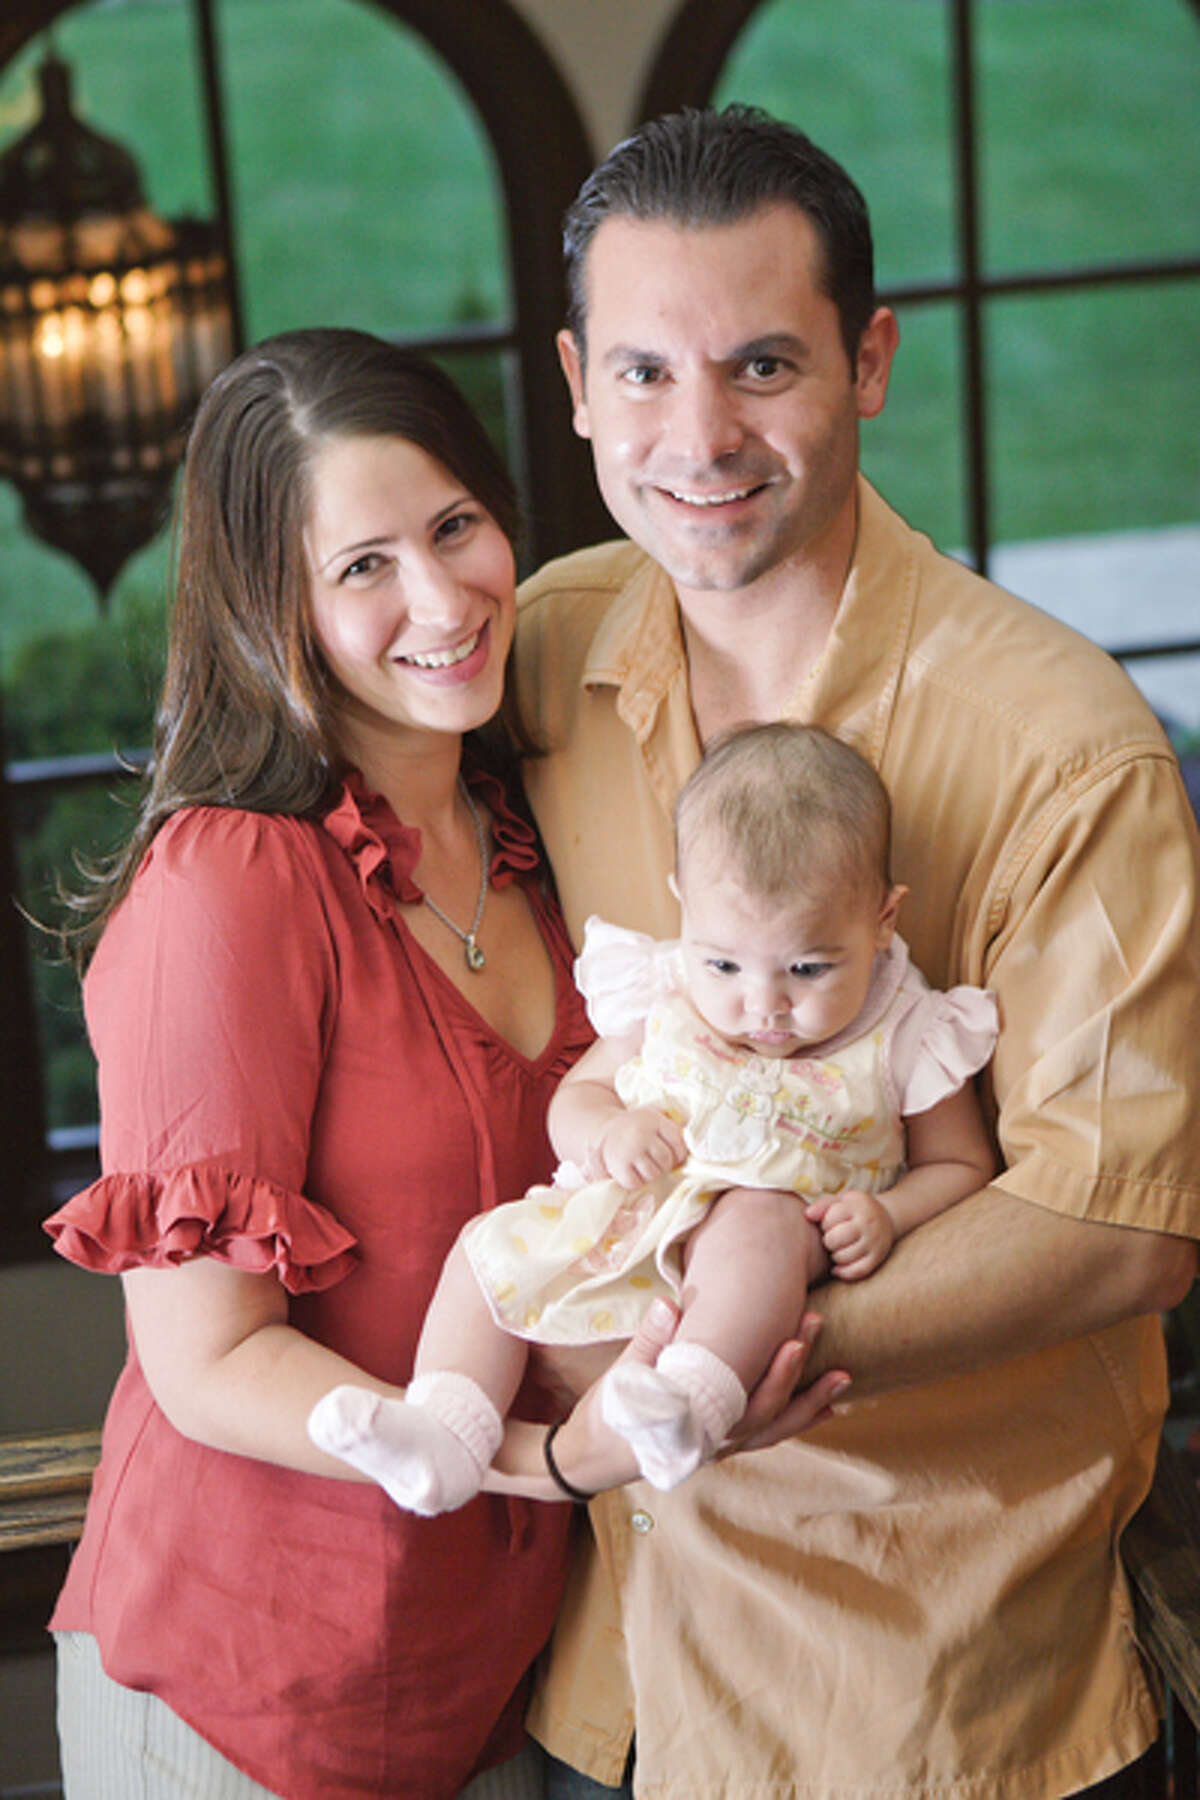 Chef Bobby Mallozzi is part of a Rotterdam-based family that oversees a veritable empire of eating establishments, including Villa Italia, the Brown Derby and the restaurant at Albany's Italian American Community Center. He and his wife Adrian became the parents of baby Stella in May 2009. (Suzanne Kawola/Life@Home) Click here to read the story.